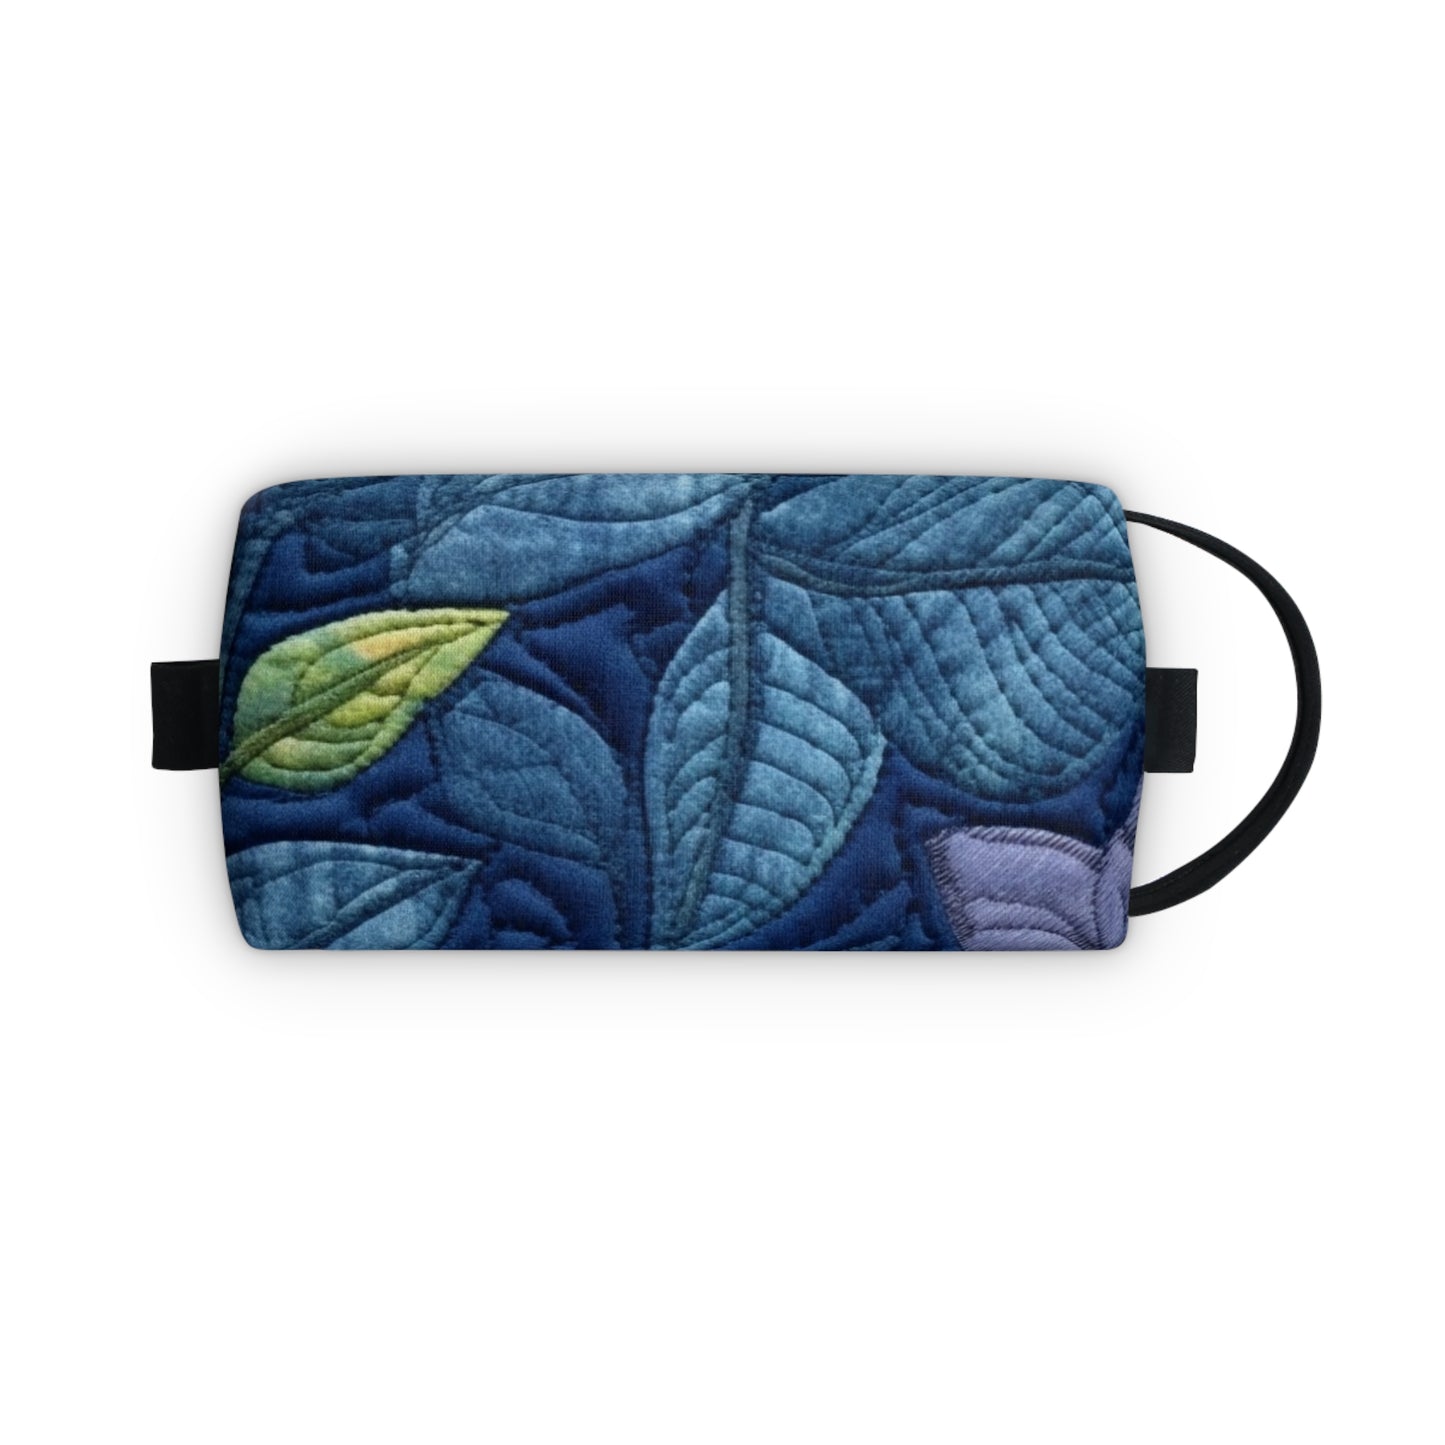 Floral Embroidery Blue: Denim-Inspired, Artisan-Crafted Flower Design - Toiletry Bag